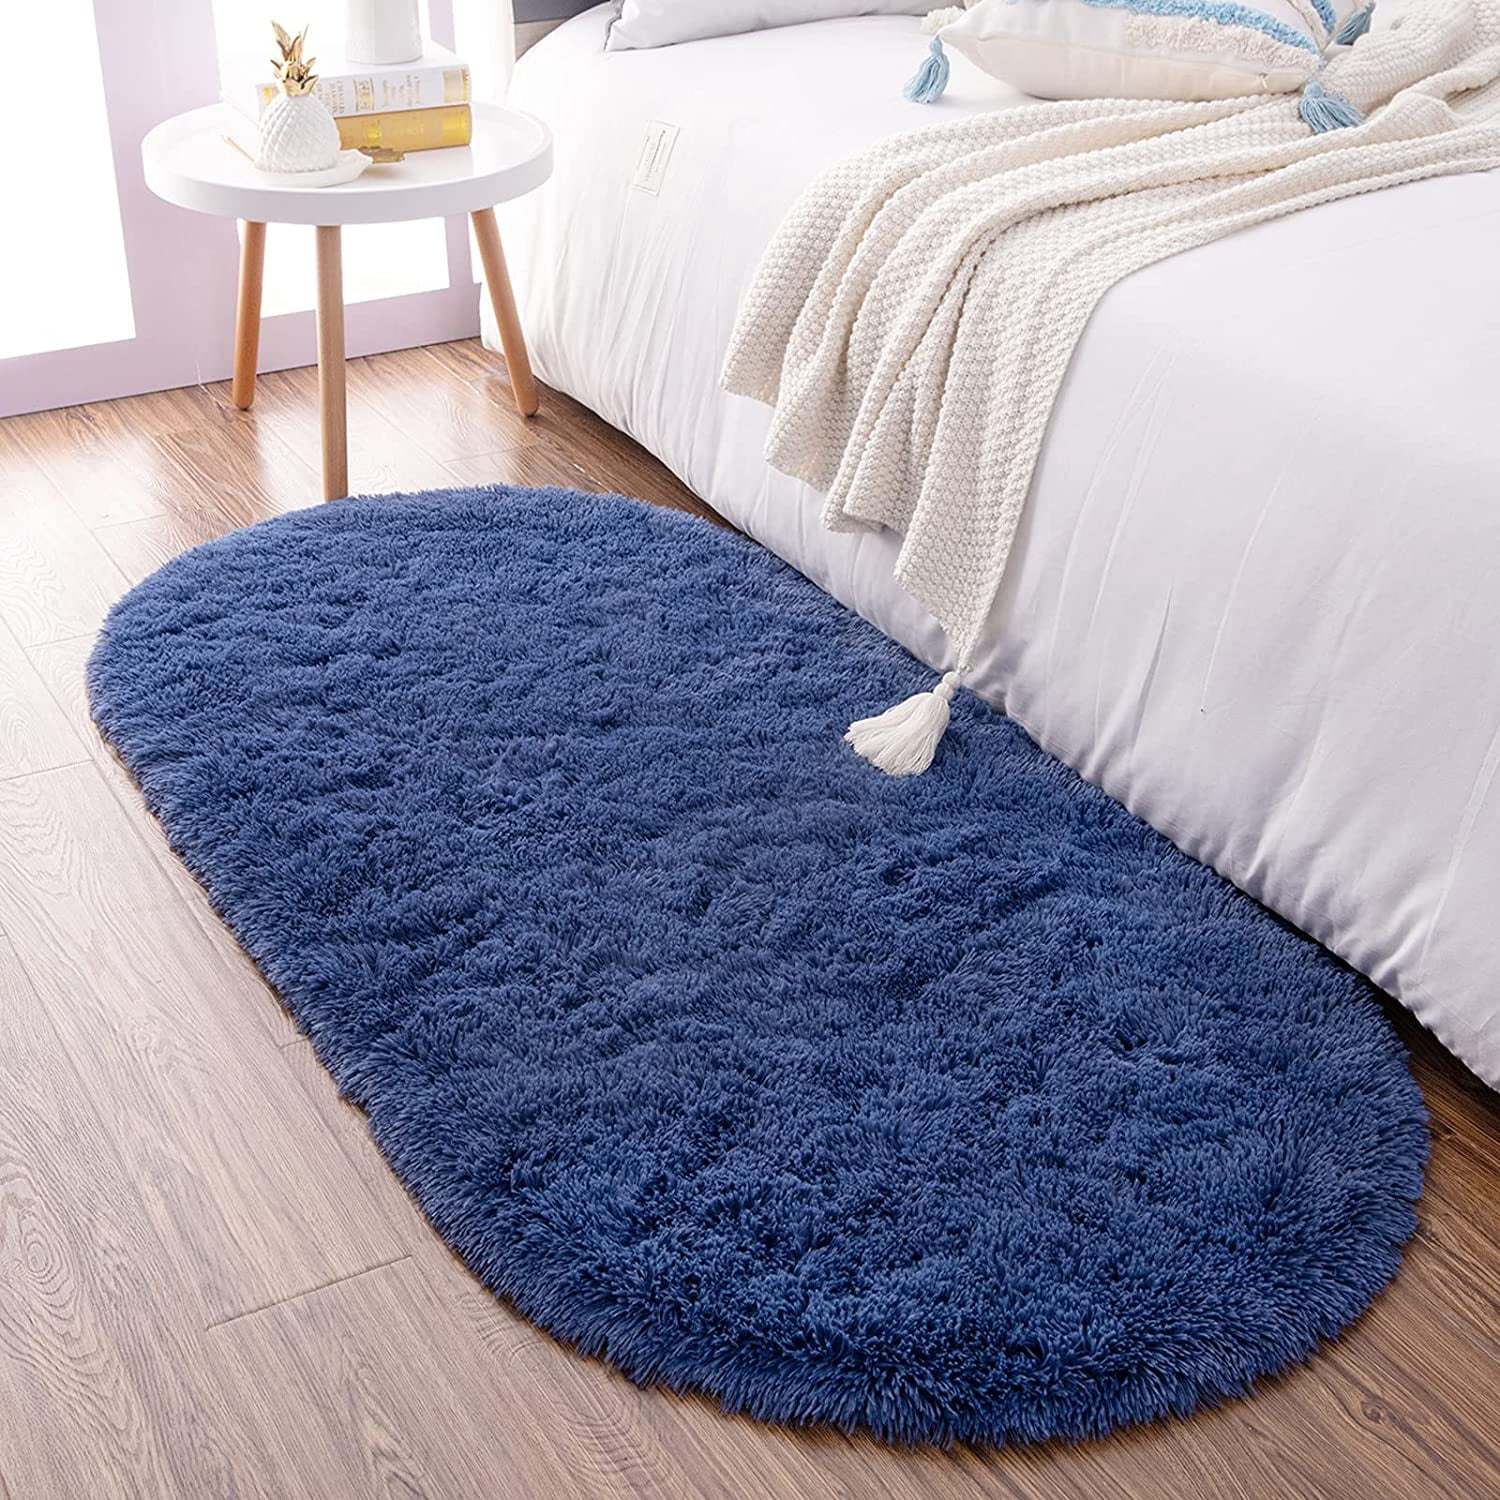 DZWSD Softlife Oval Area Rugs For Bedroom Extra Soft & Easy Clean Shaggy Area Rugs Plush Carpet For Kids Room Decor,-Oval 